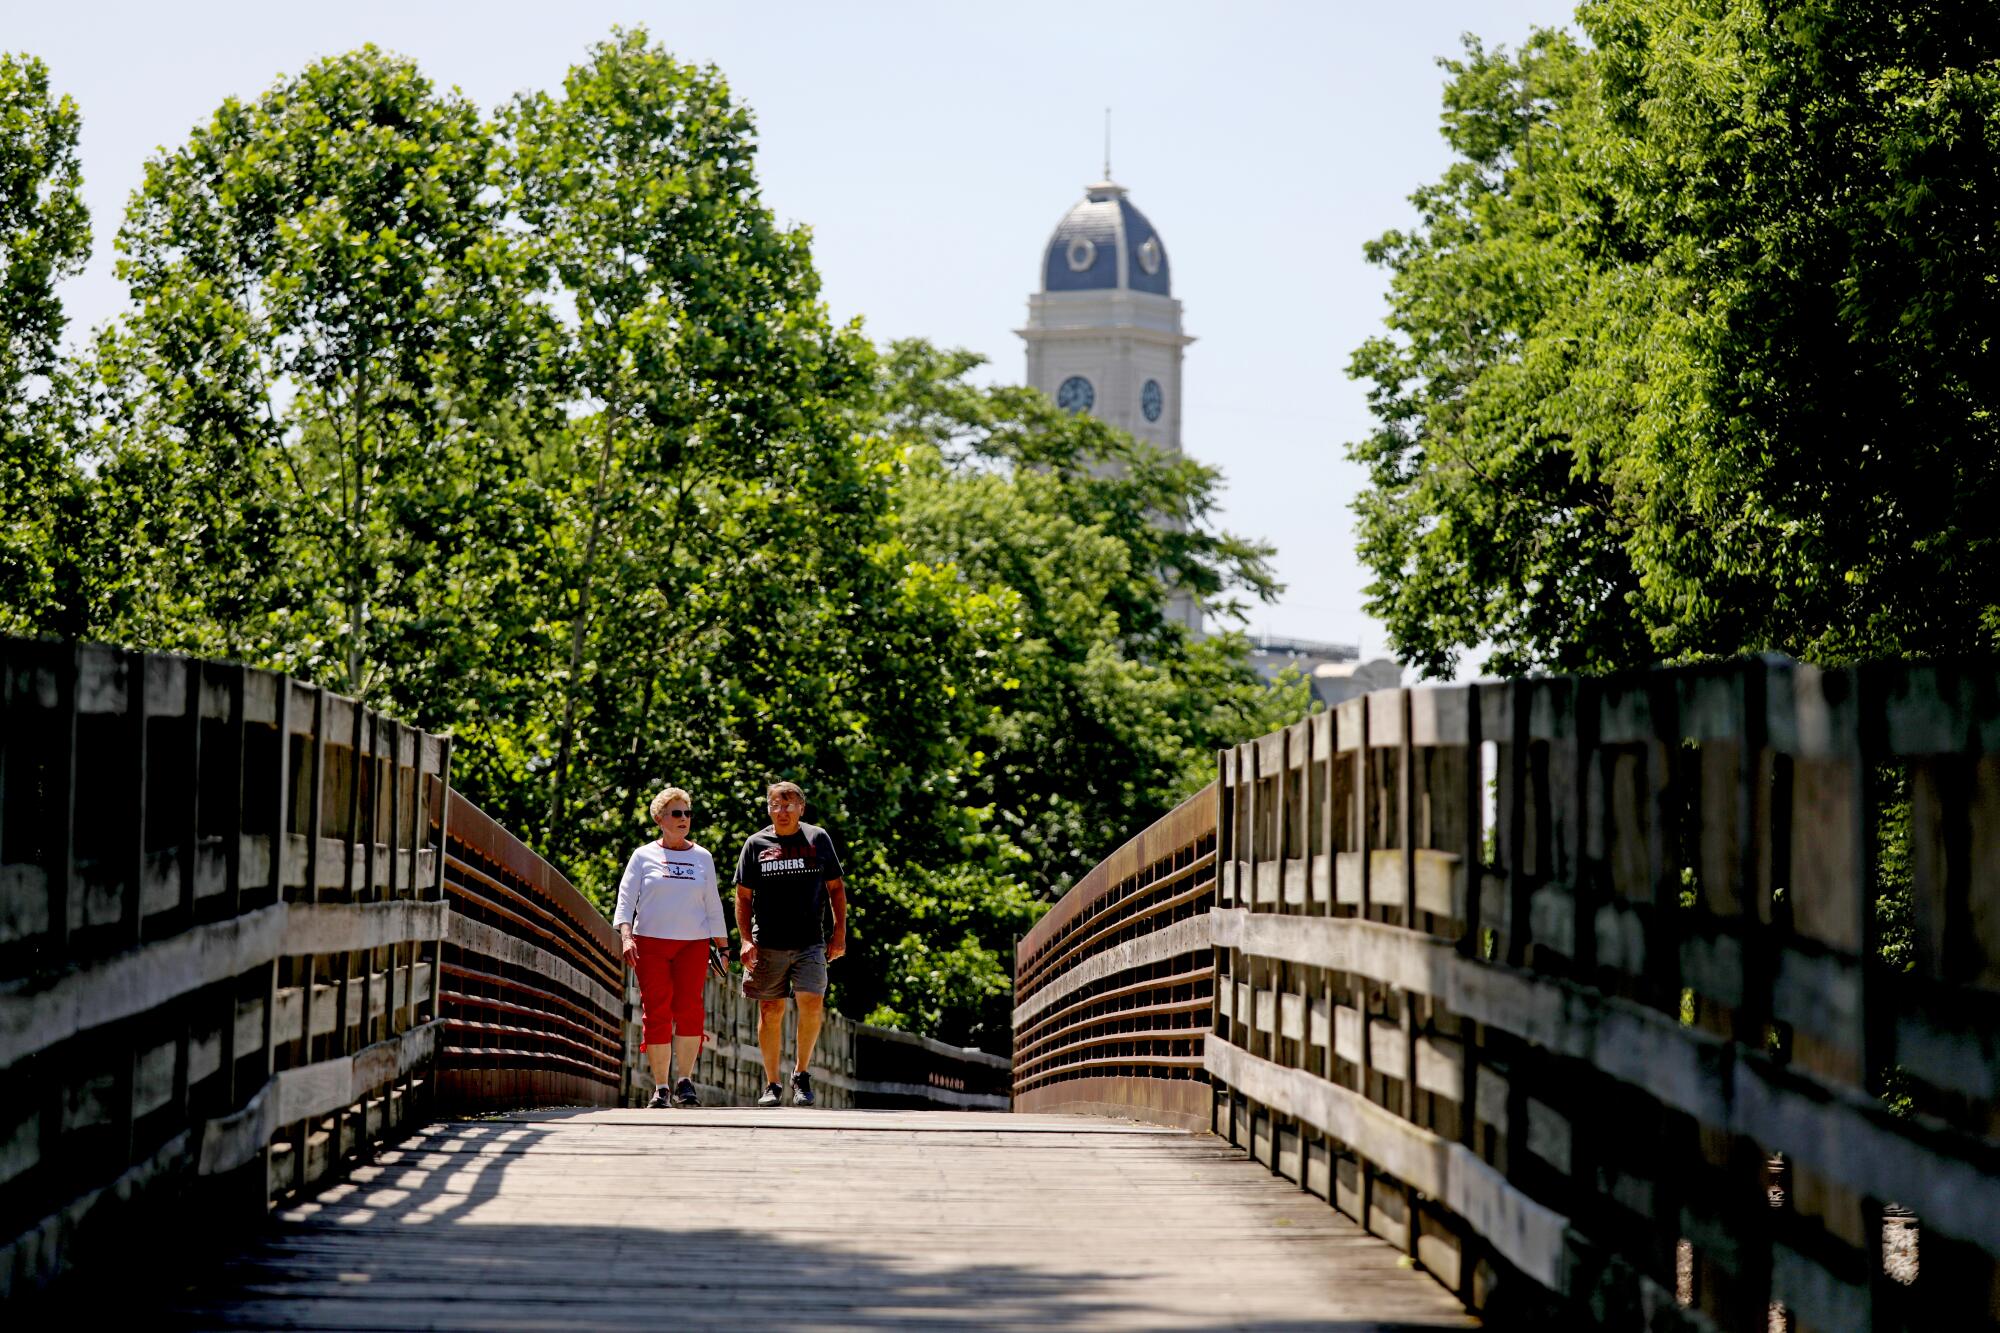 A couple walks across a footbridge in a wooded area with a cupola of a building in the distant background